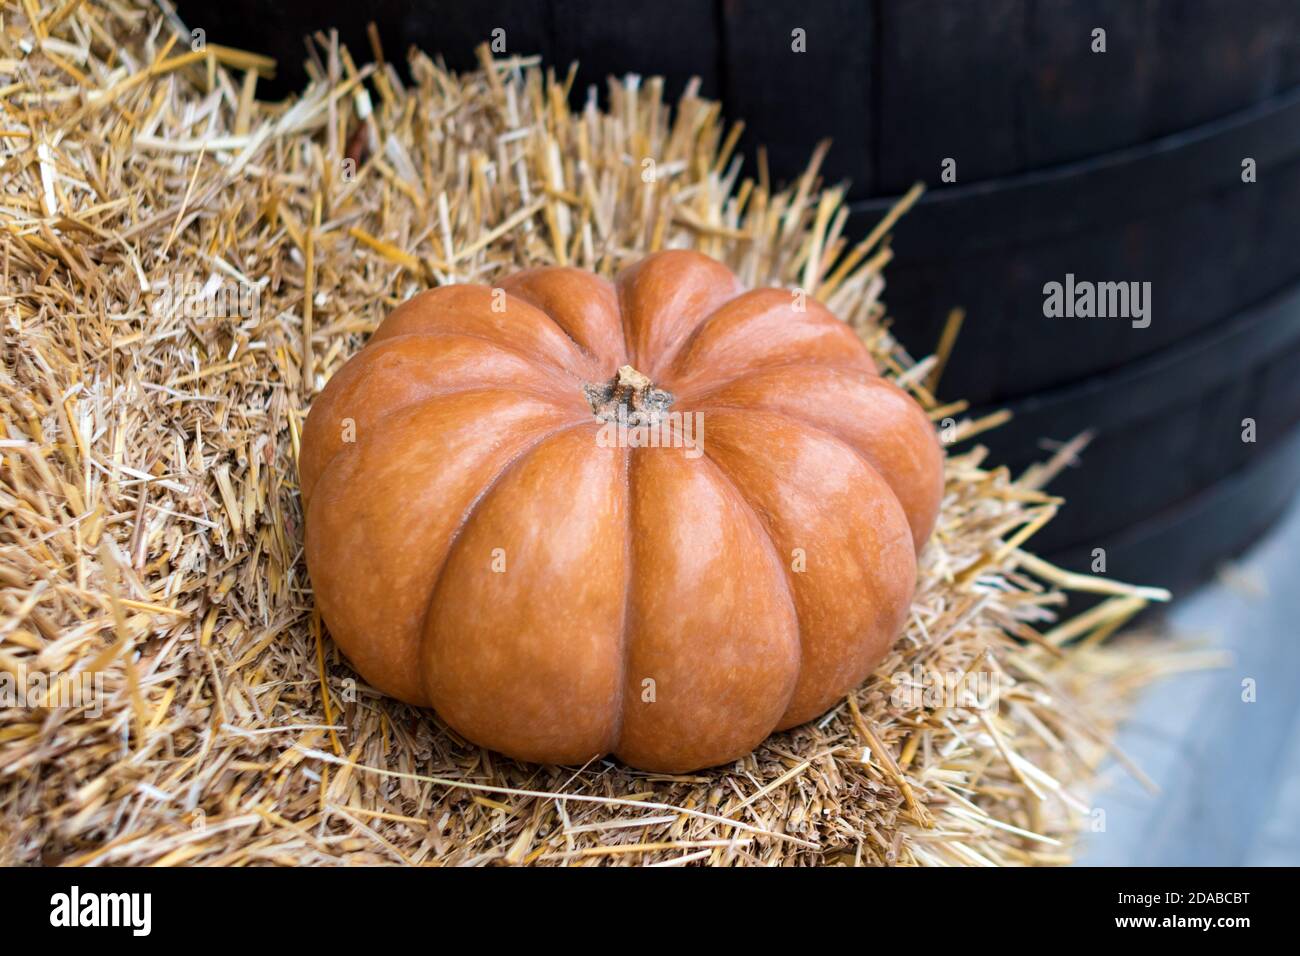 Autumn decor detail with natural straw bale and pumpkin. Harvest and garden outdoor decorations for Halloween, Thanksgiving, autumn season still life. Stock Photo